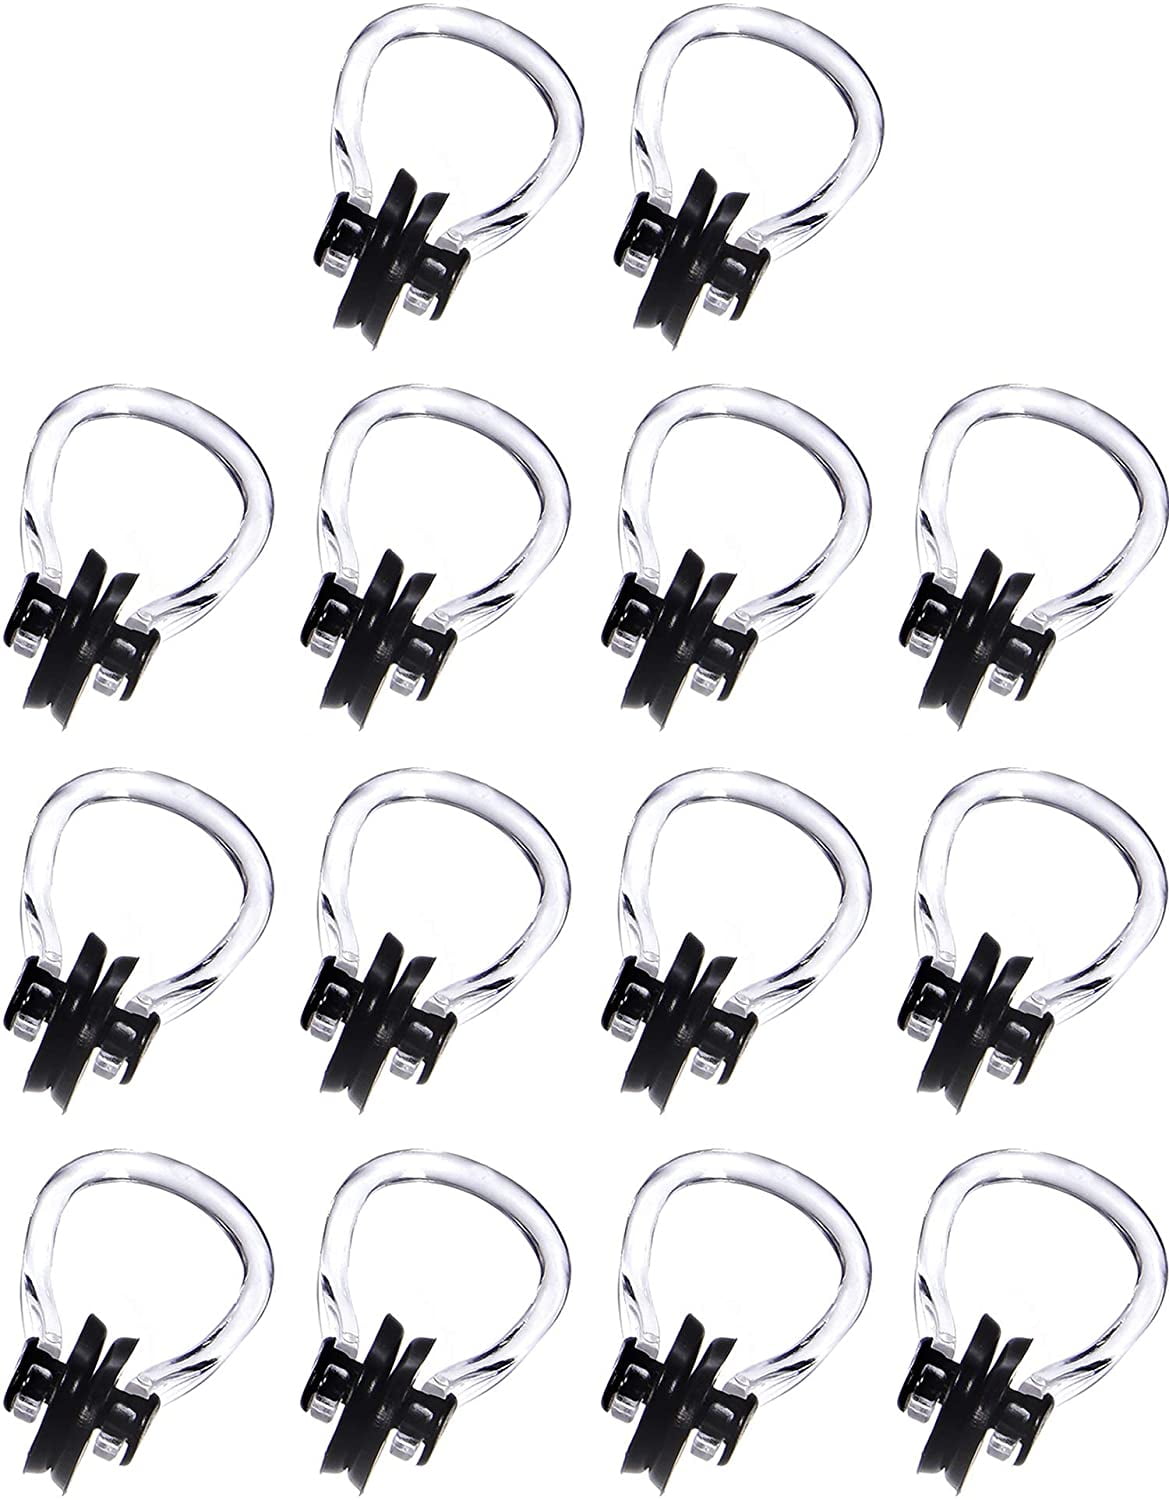 Hicarer 14 Pieces Nose Clip Swimming Nose Plug Swim Nose Protector for Swimming